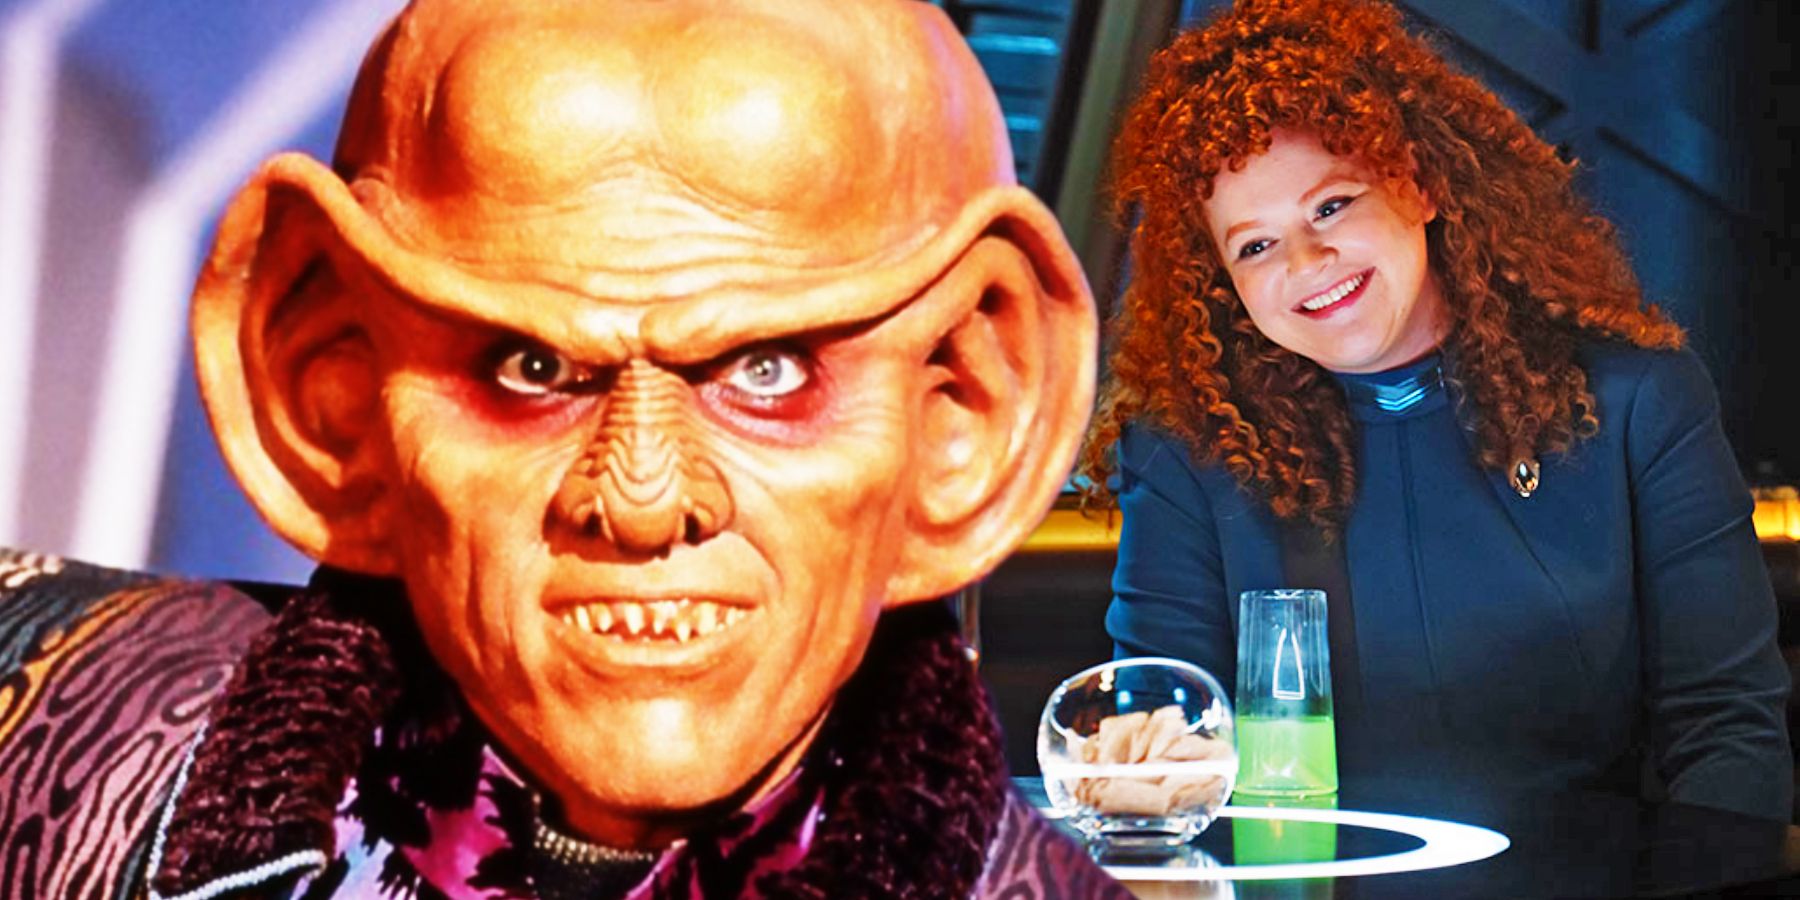 Quark smiles at the camera while Lt. Tilly enjoys a green drink